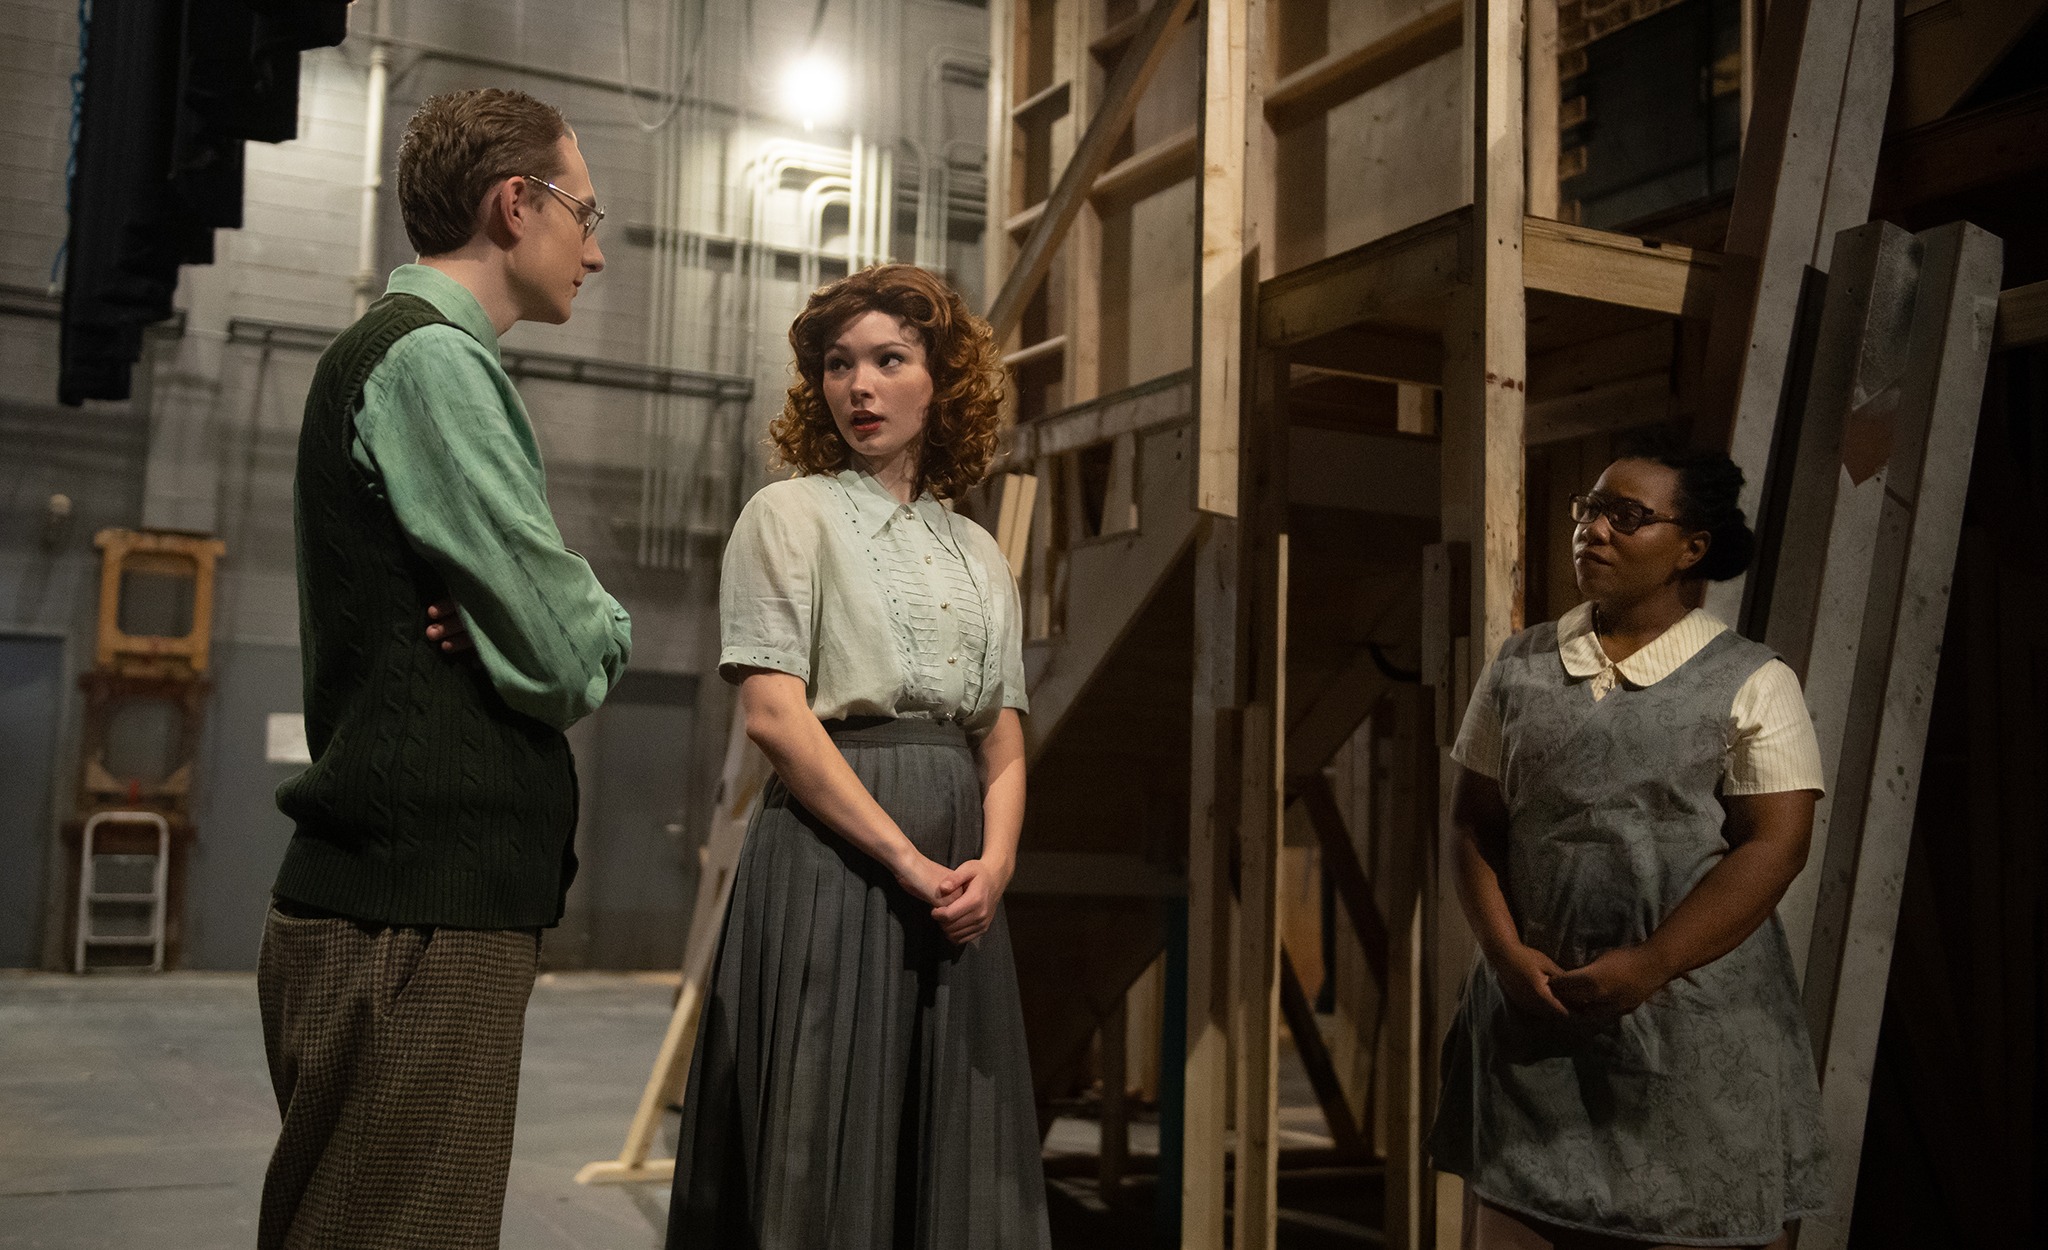 Hannah Rose Richards (center), as theater director Maggie Dalton in George Brant’s “Into the Breeches!” discusses the fictional Oberon Play House’s production of Shakespeare’s “Henriad” with that theater’s stage manager, Stuart Lasker, played by Ward Sikma (left), and seamstress, Ida Green, played by Catrina Winters. Photo by Kevin Bain/Ole Miss Digital Imaging Services